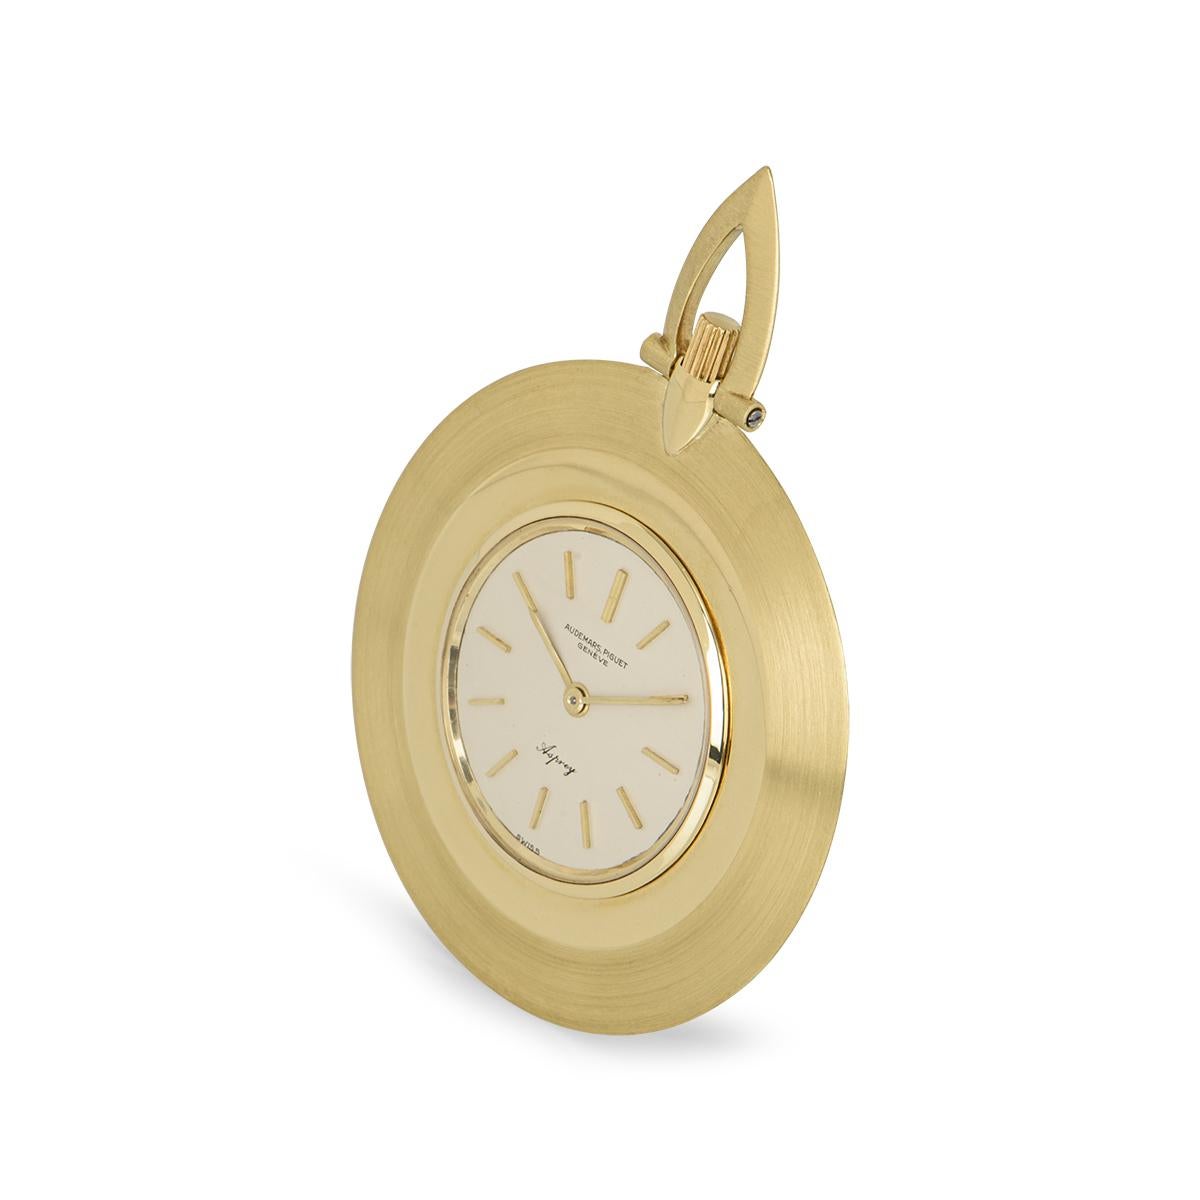 A vintage open face dress 41mm pocket watch in yellow gold by Audemars Piguet, retailed by Asprey. Featuring a silver dial with mineral glass. Fitted with a manual wind movement which is shown close up in the photos.

The piece is in excellent